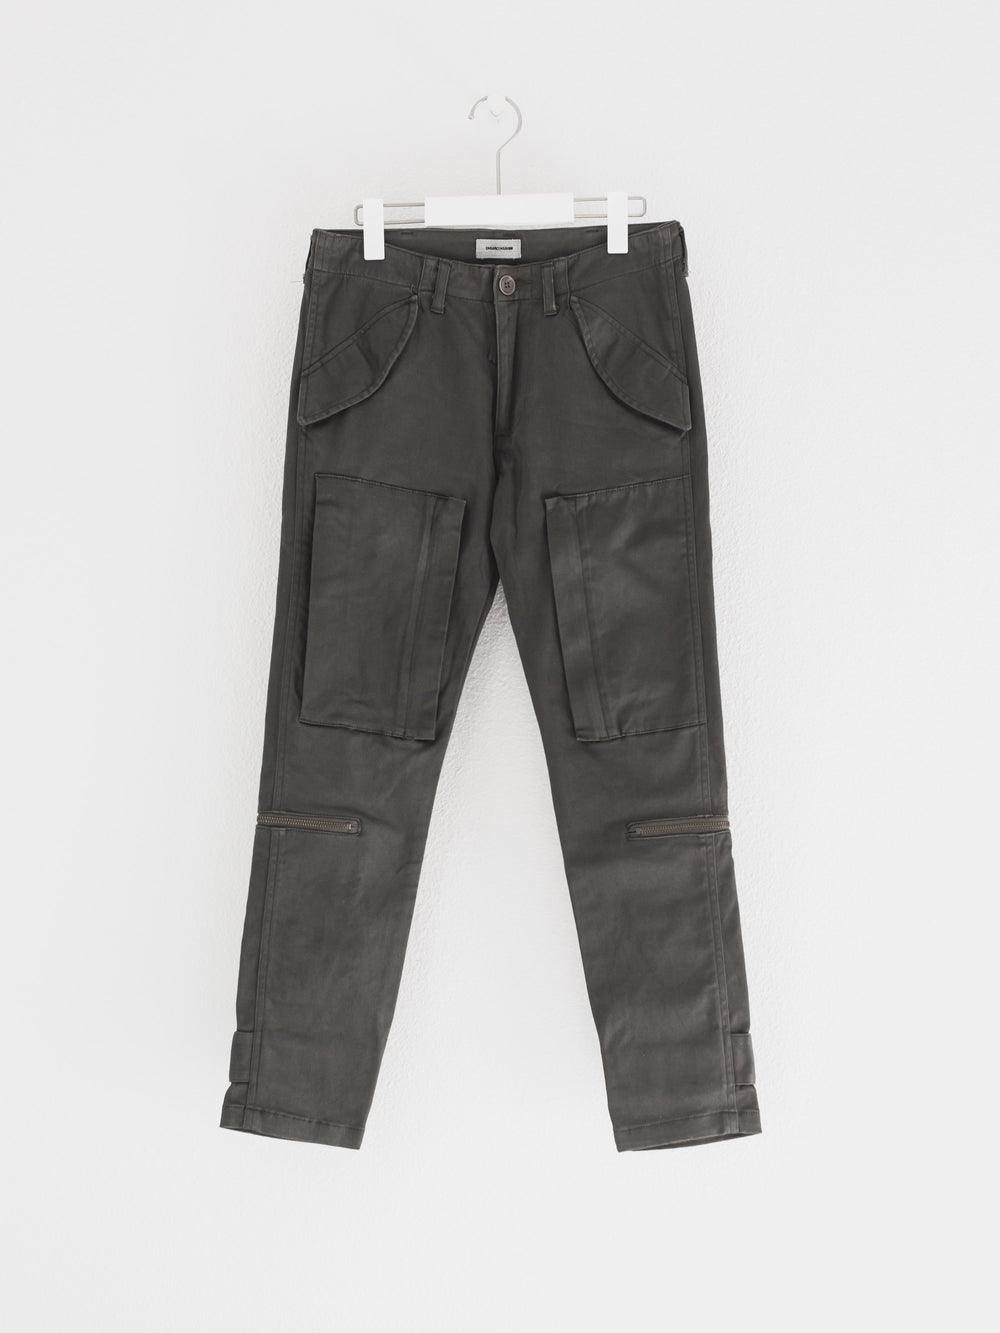 Undercover AW13 Anatomicouture Zip Cargo Pants